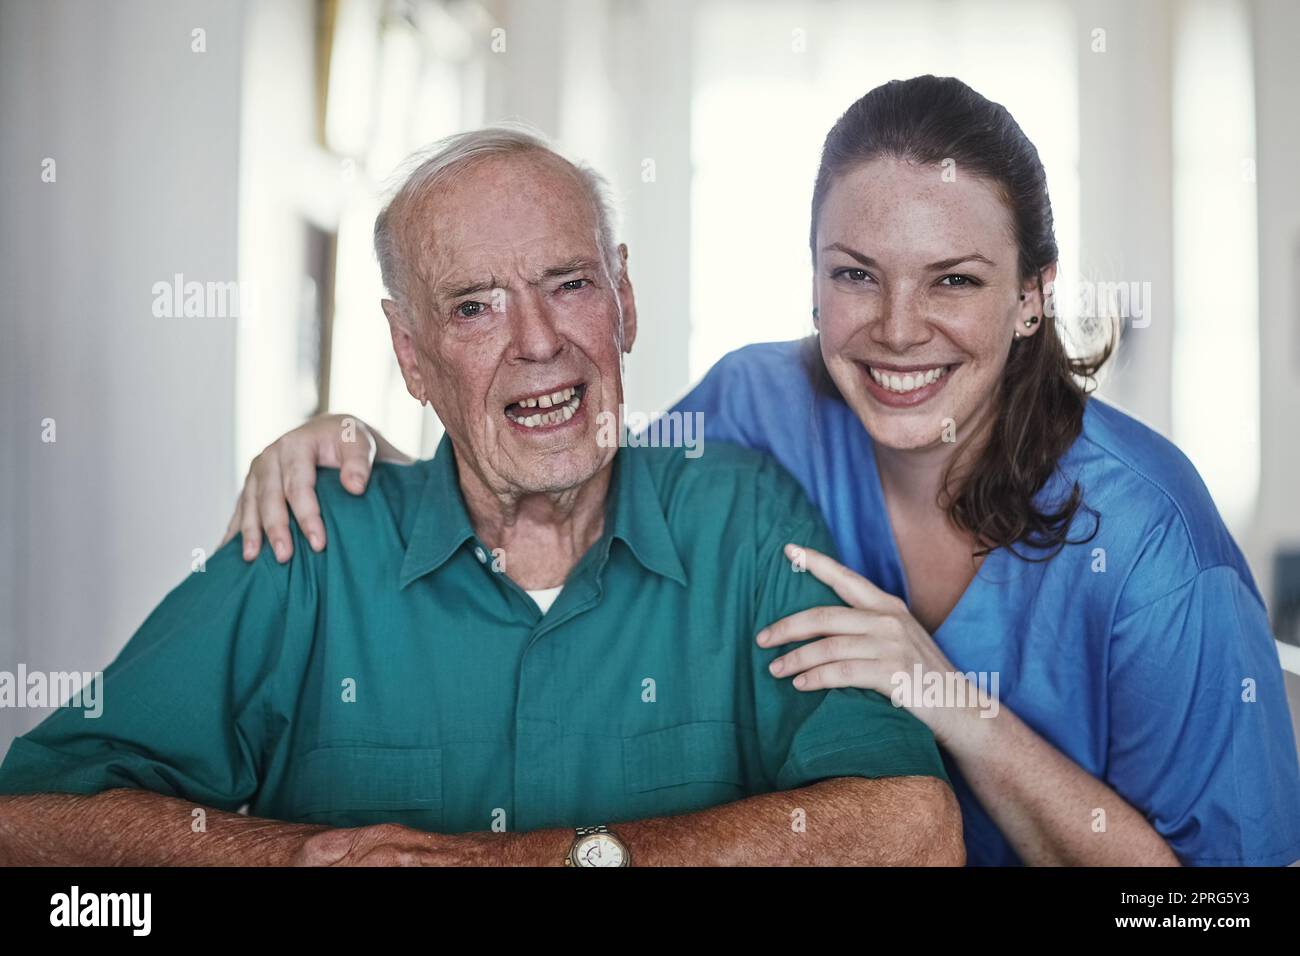 I make sure that hes taken care of. a female nurse standing next to her senior patient. Stock Photo